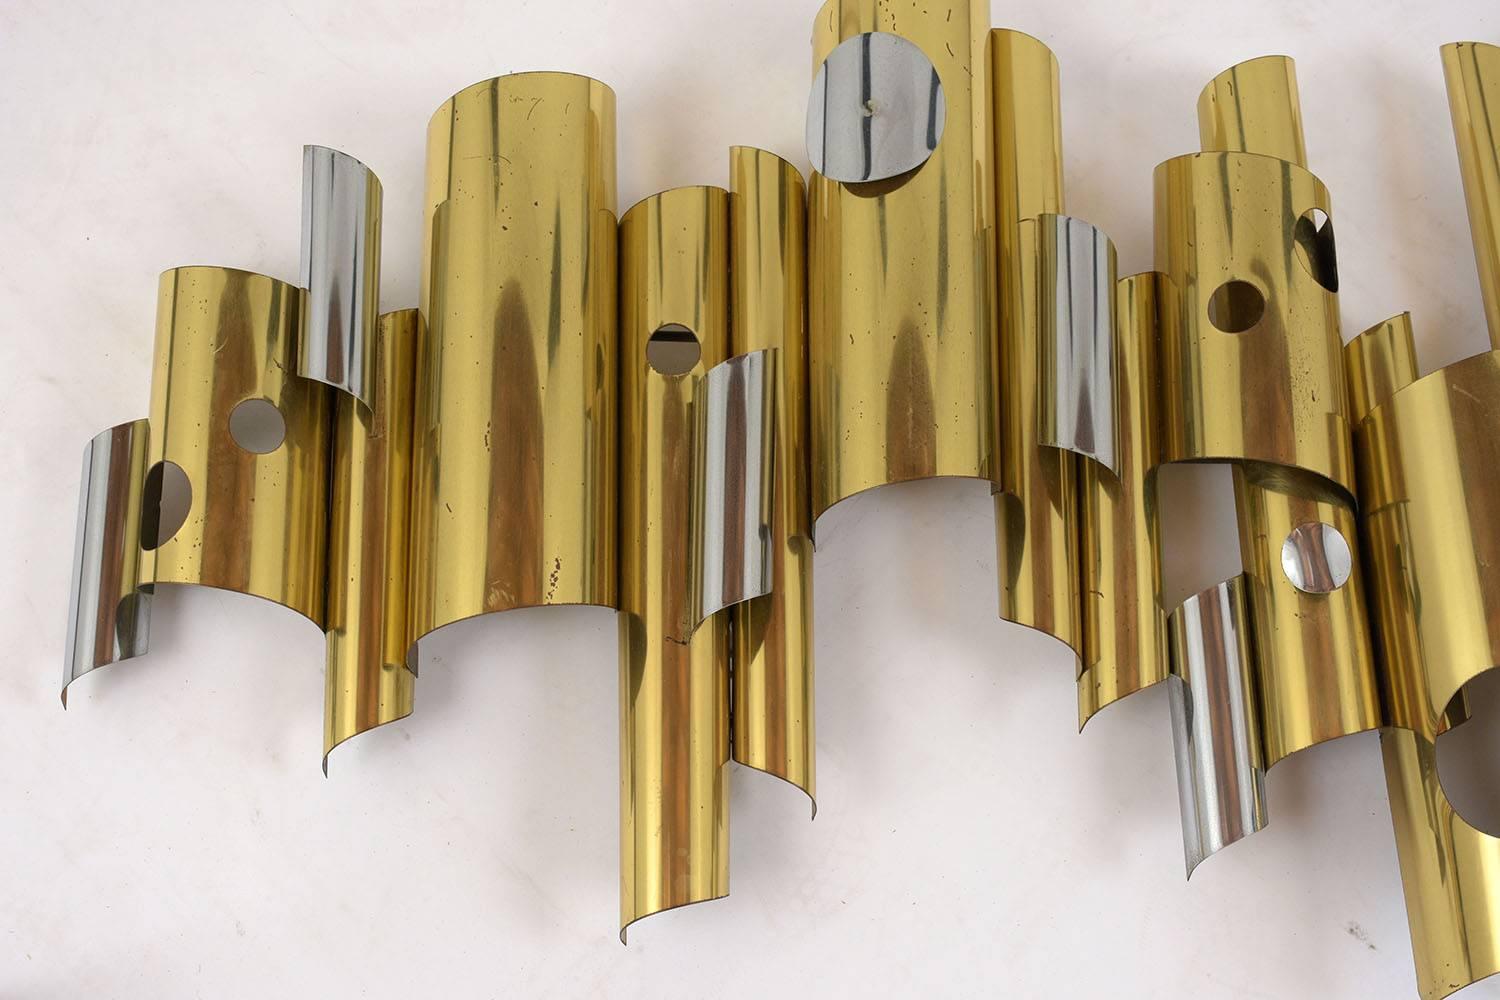 This 1960s Mid-Century Modern style wall sculpture is by C. Jere. The sculpture features brass and chrome cylinders in different sizes and lengths with cut out details. This sculpture is sturdy, stunning, and ready to be hung on any wall for years